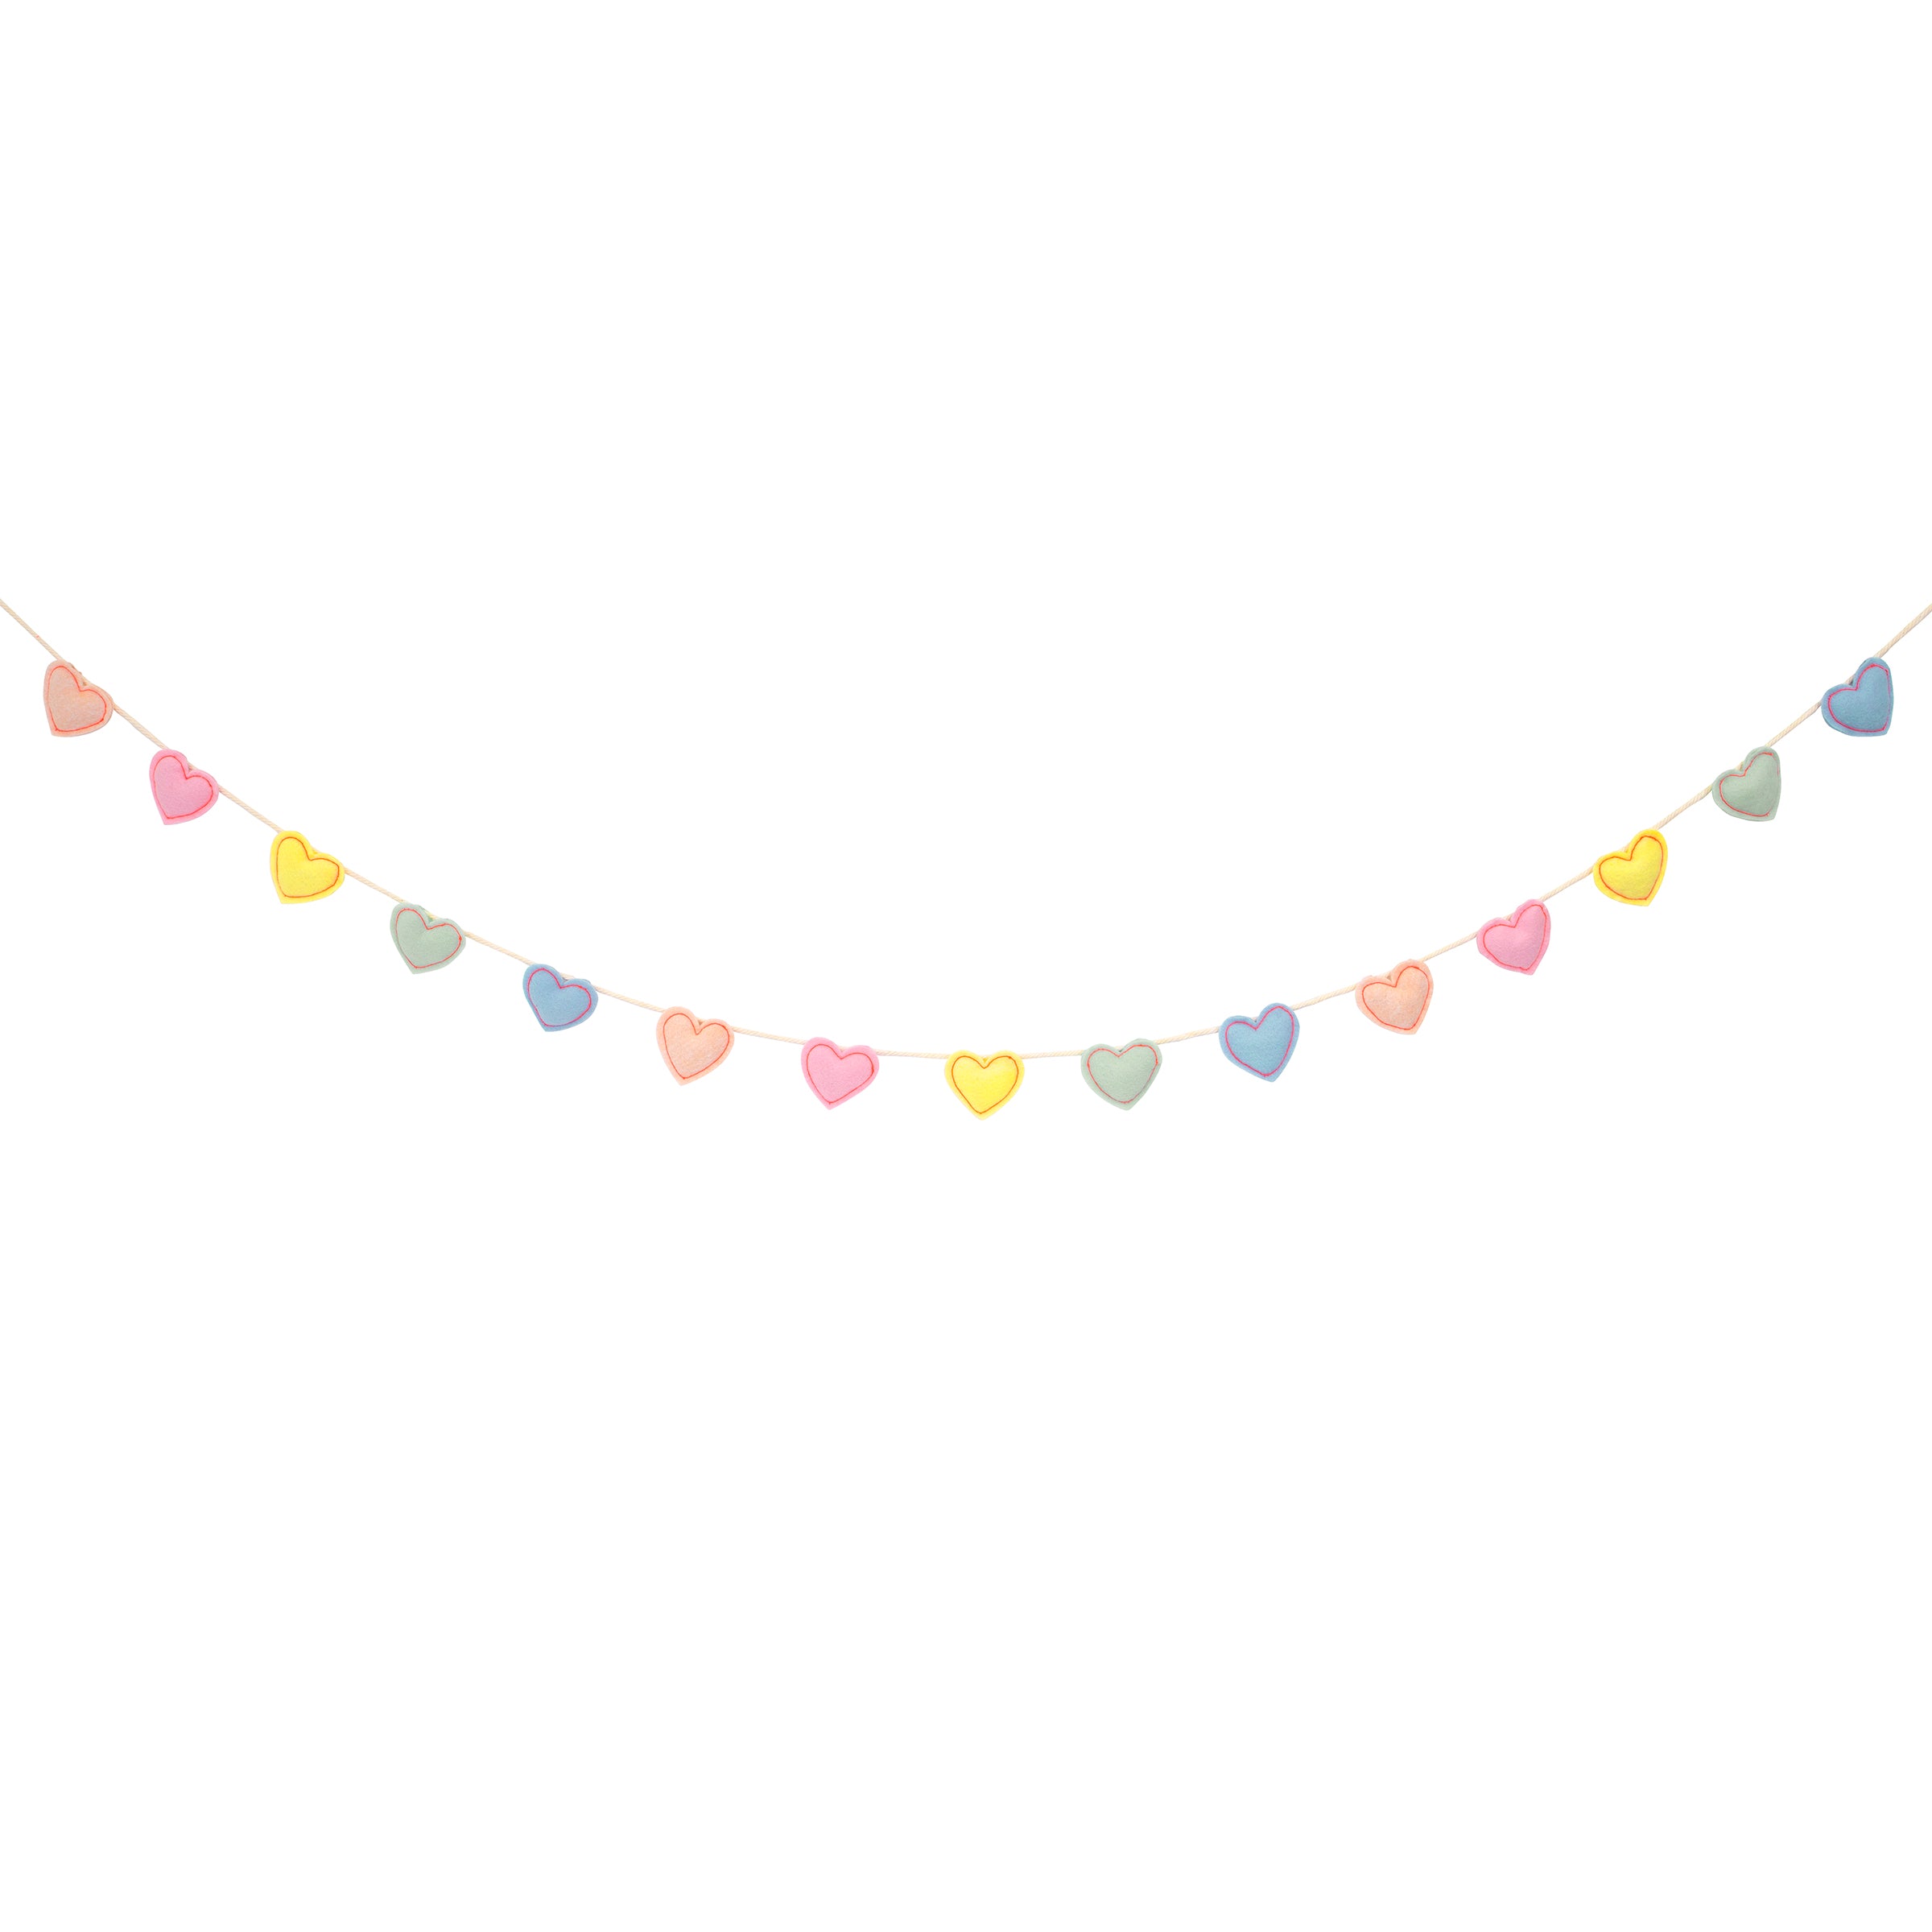 Our felt garland, featuring colorful hearts, is the perfect anniversary decoration or Valentine's Day decoration.